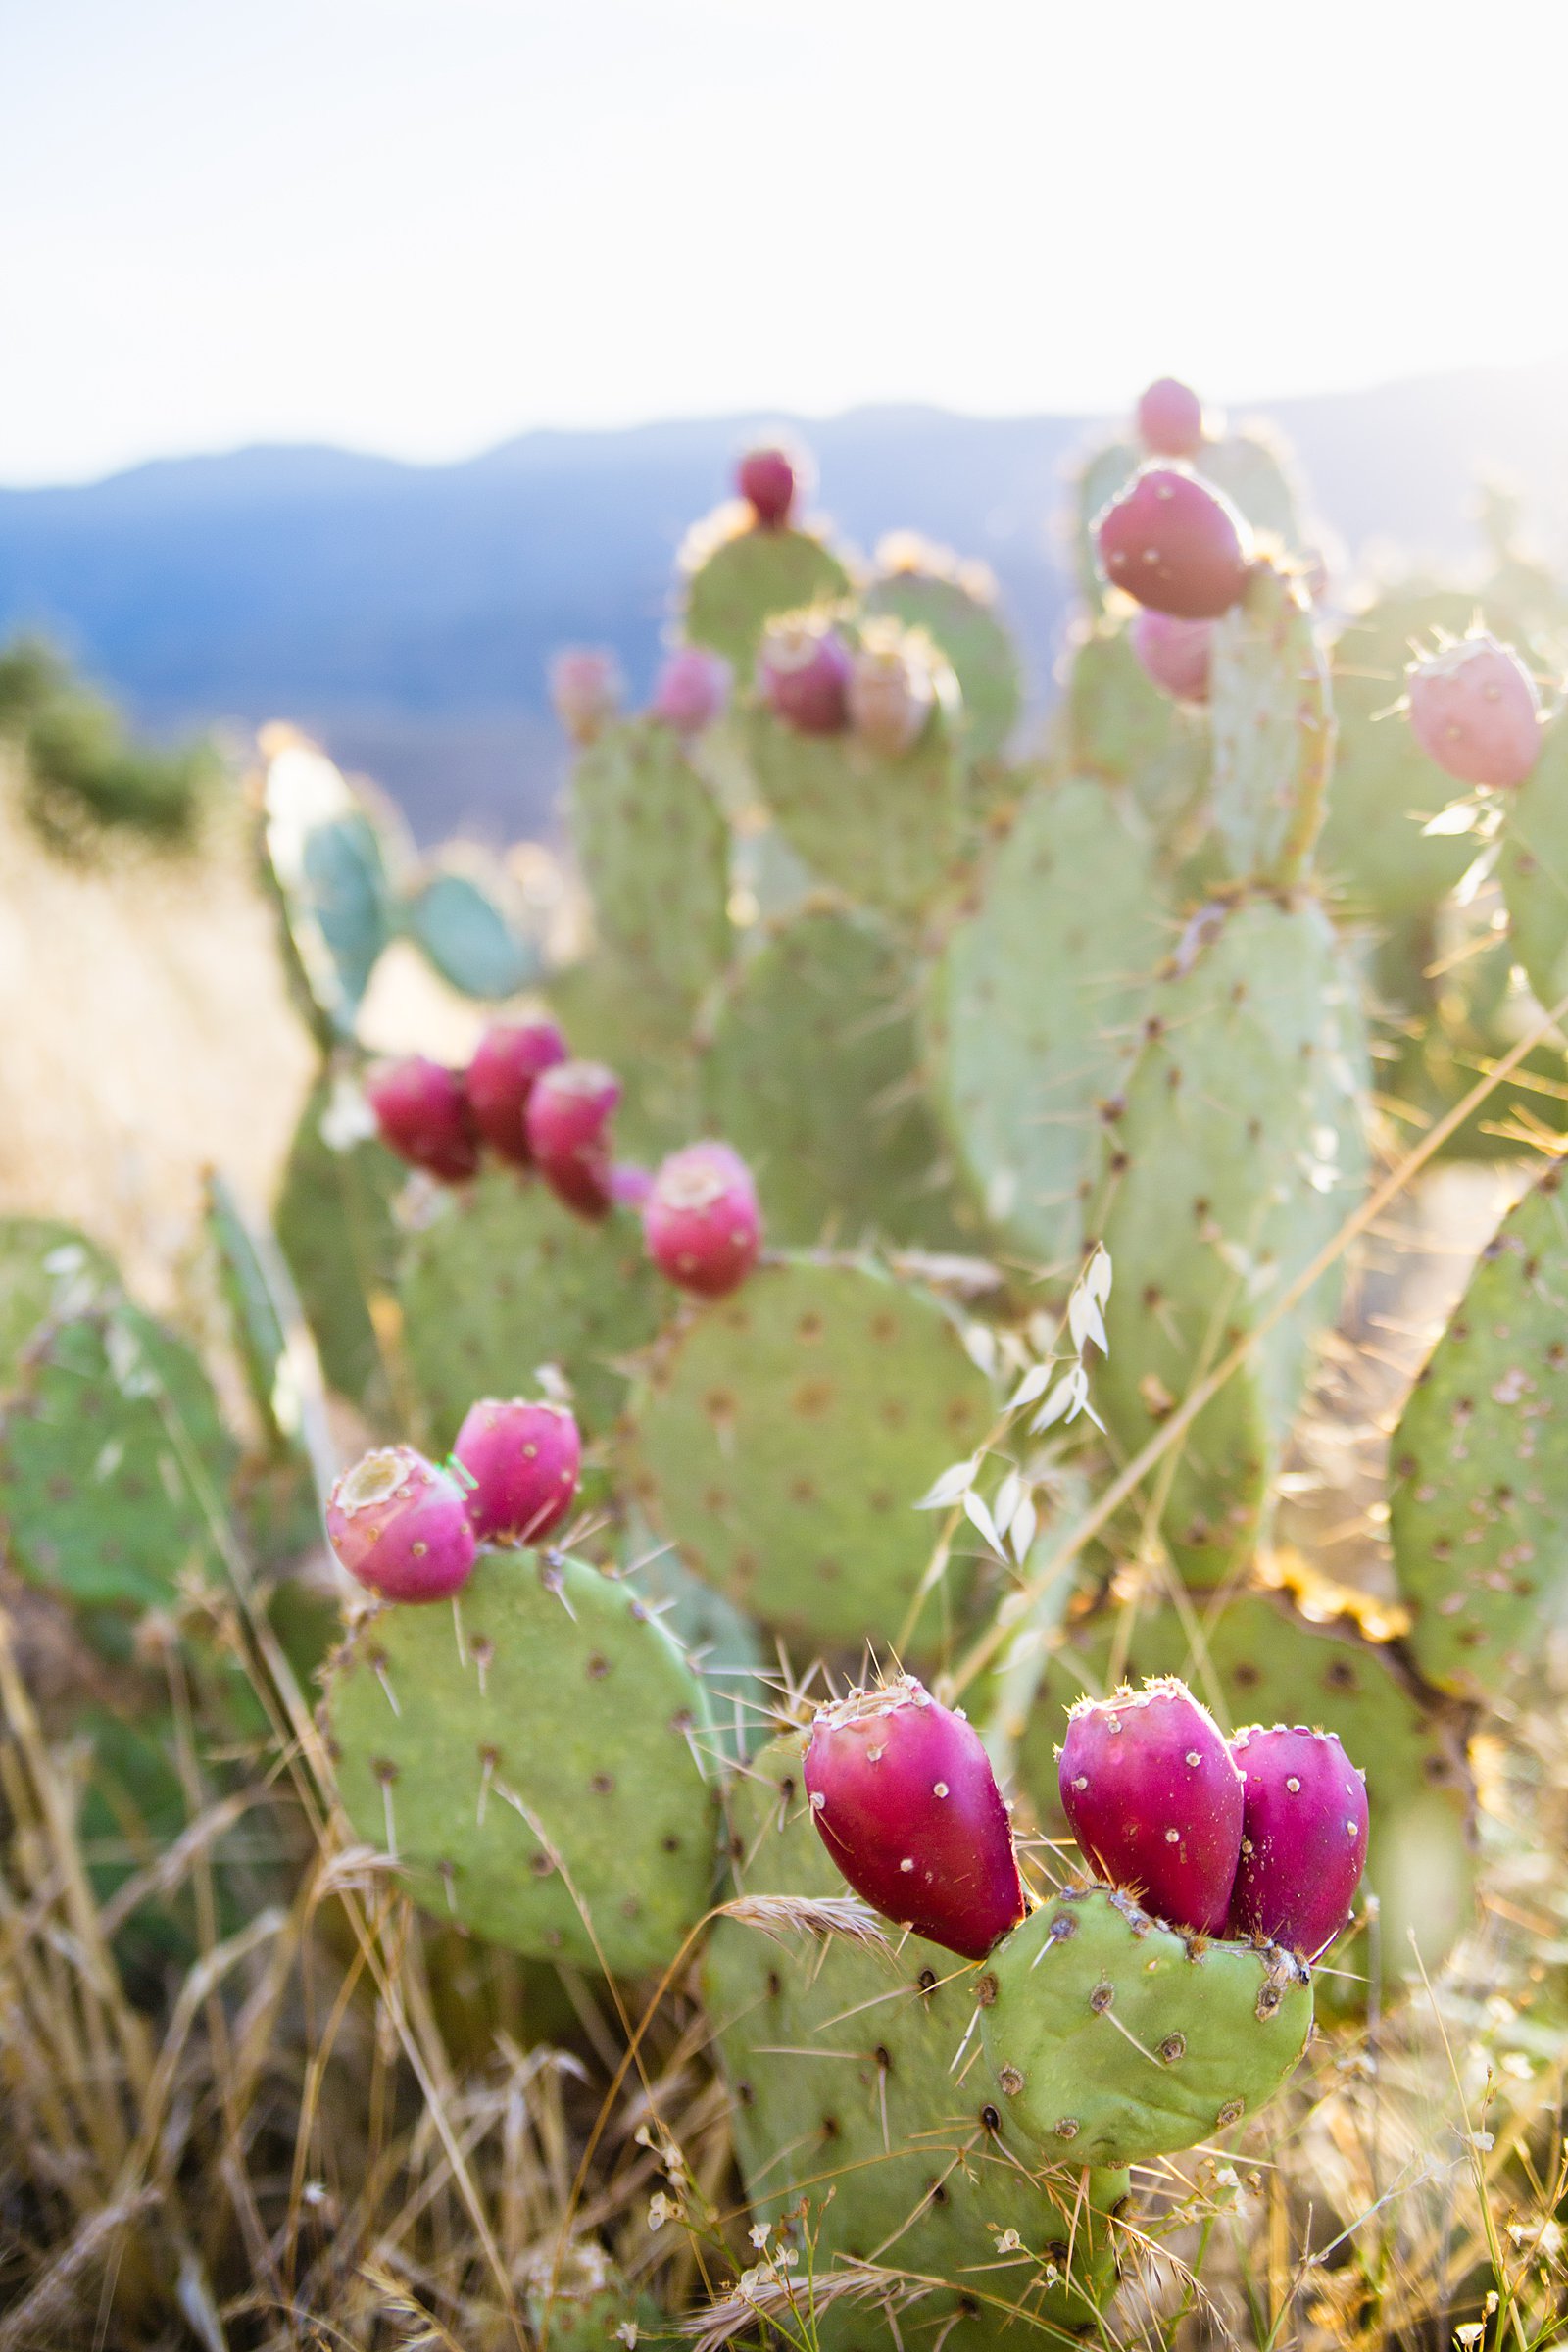 Detail image of prickly pears during a couple's engagement session.